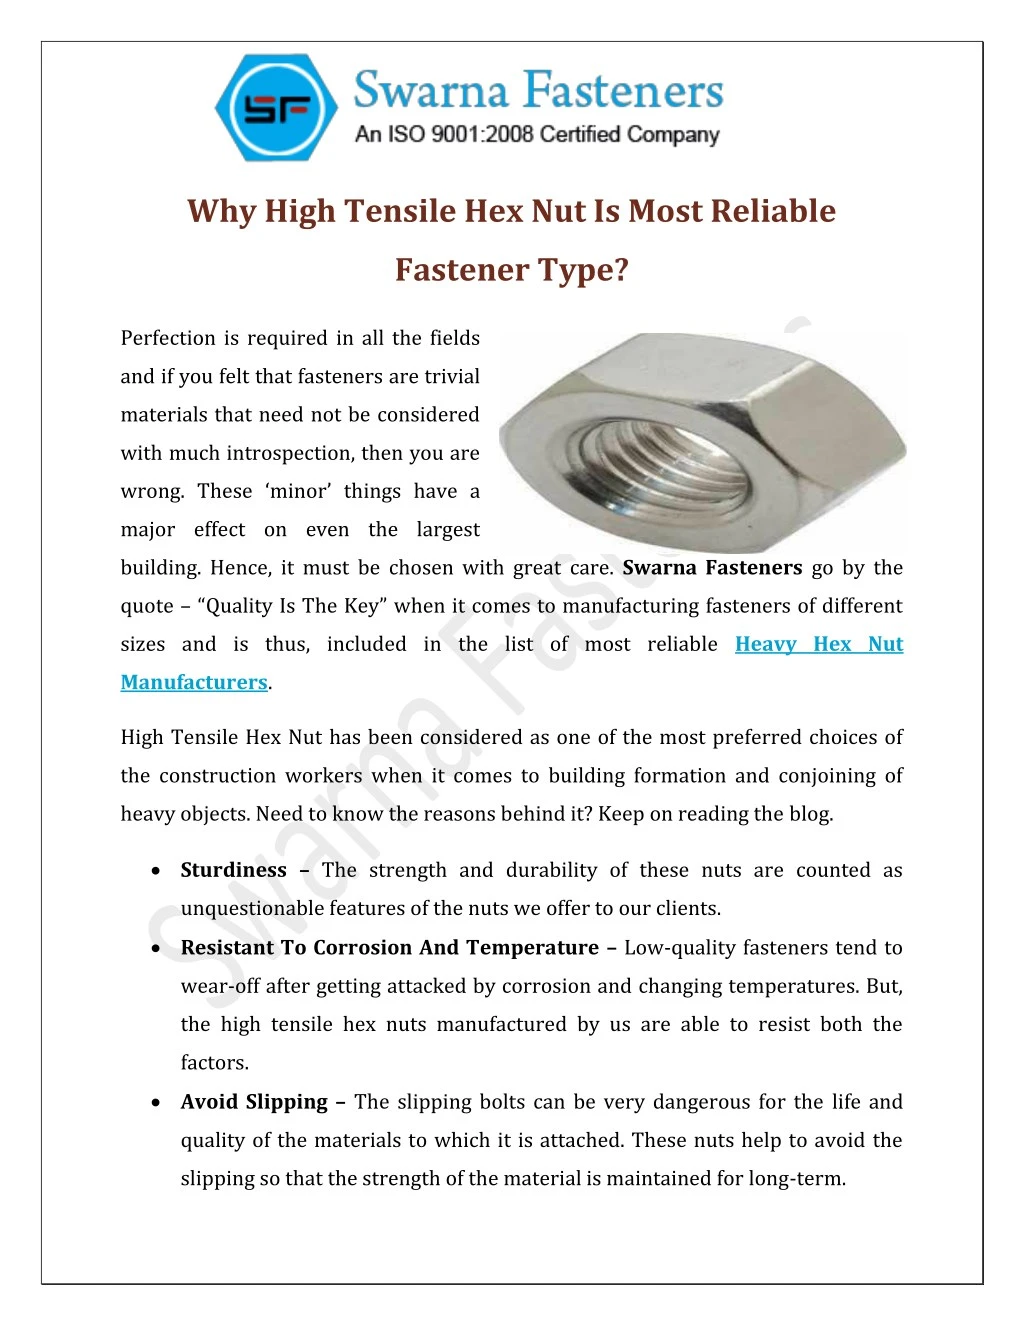 why high tensile hex nut is most reliable